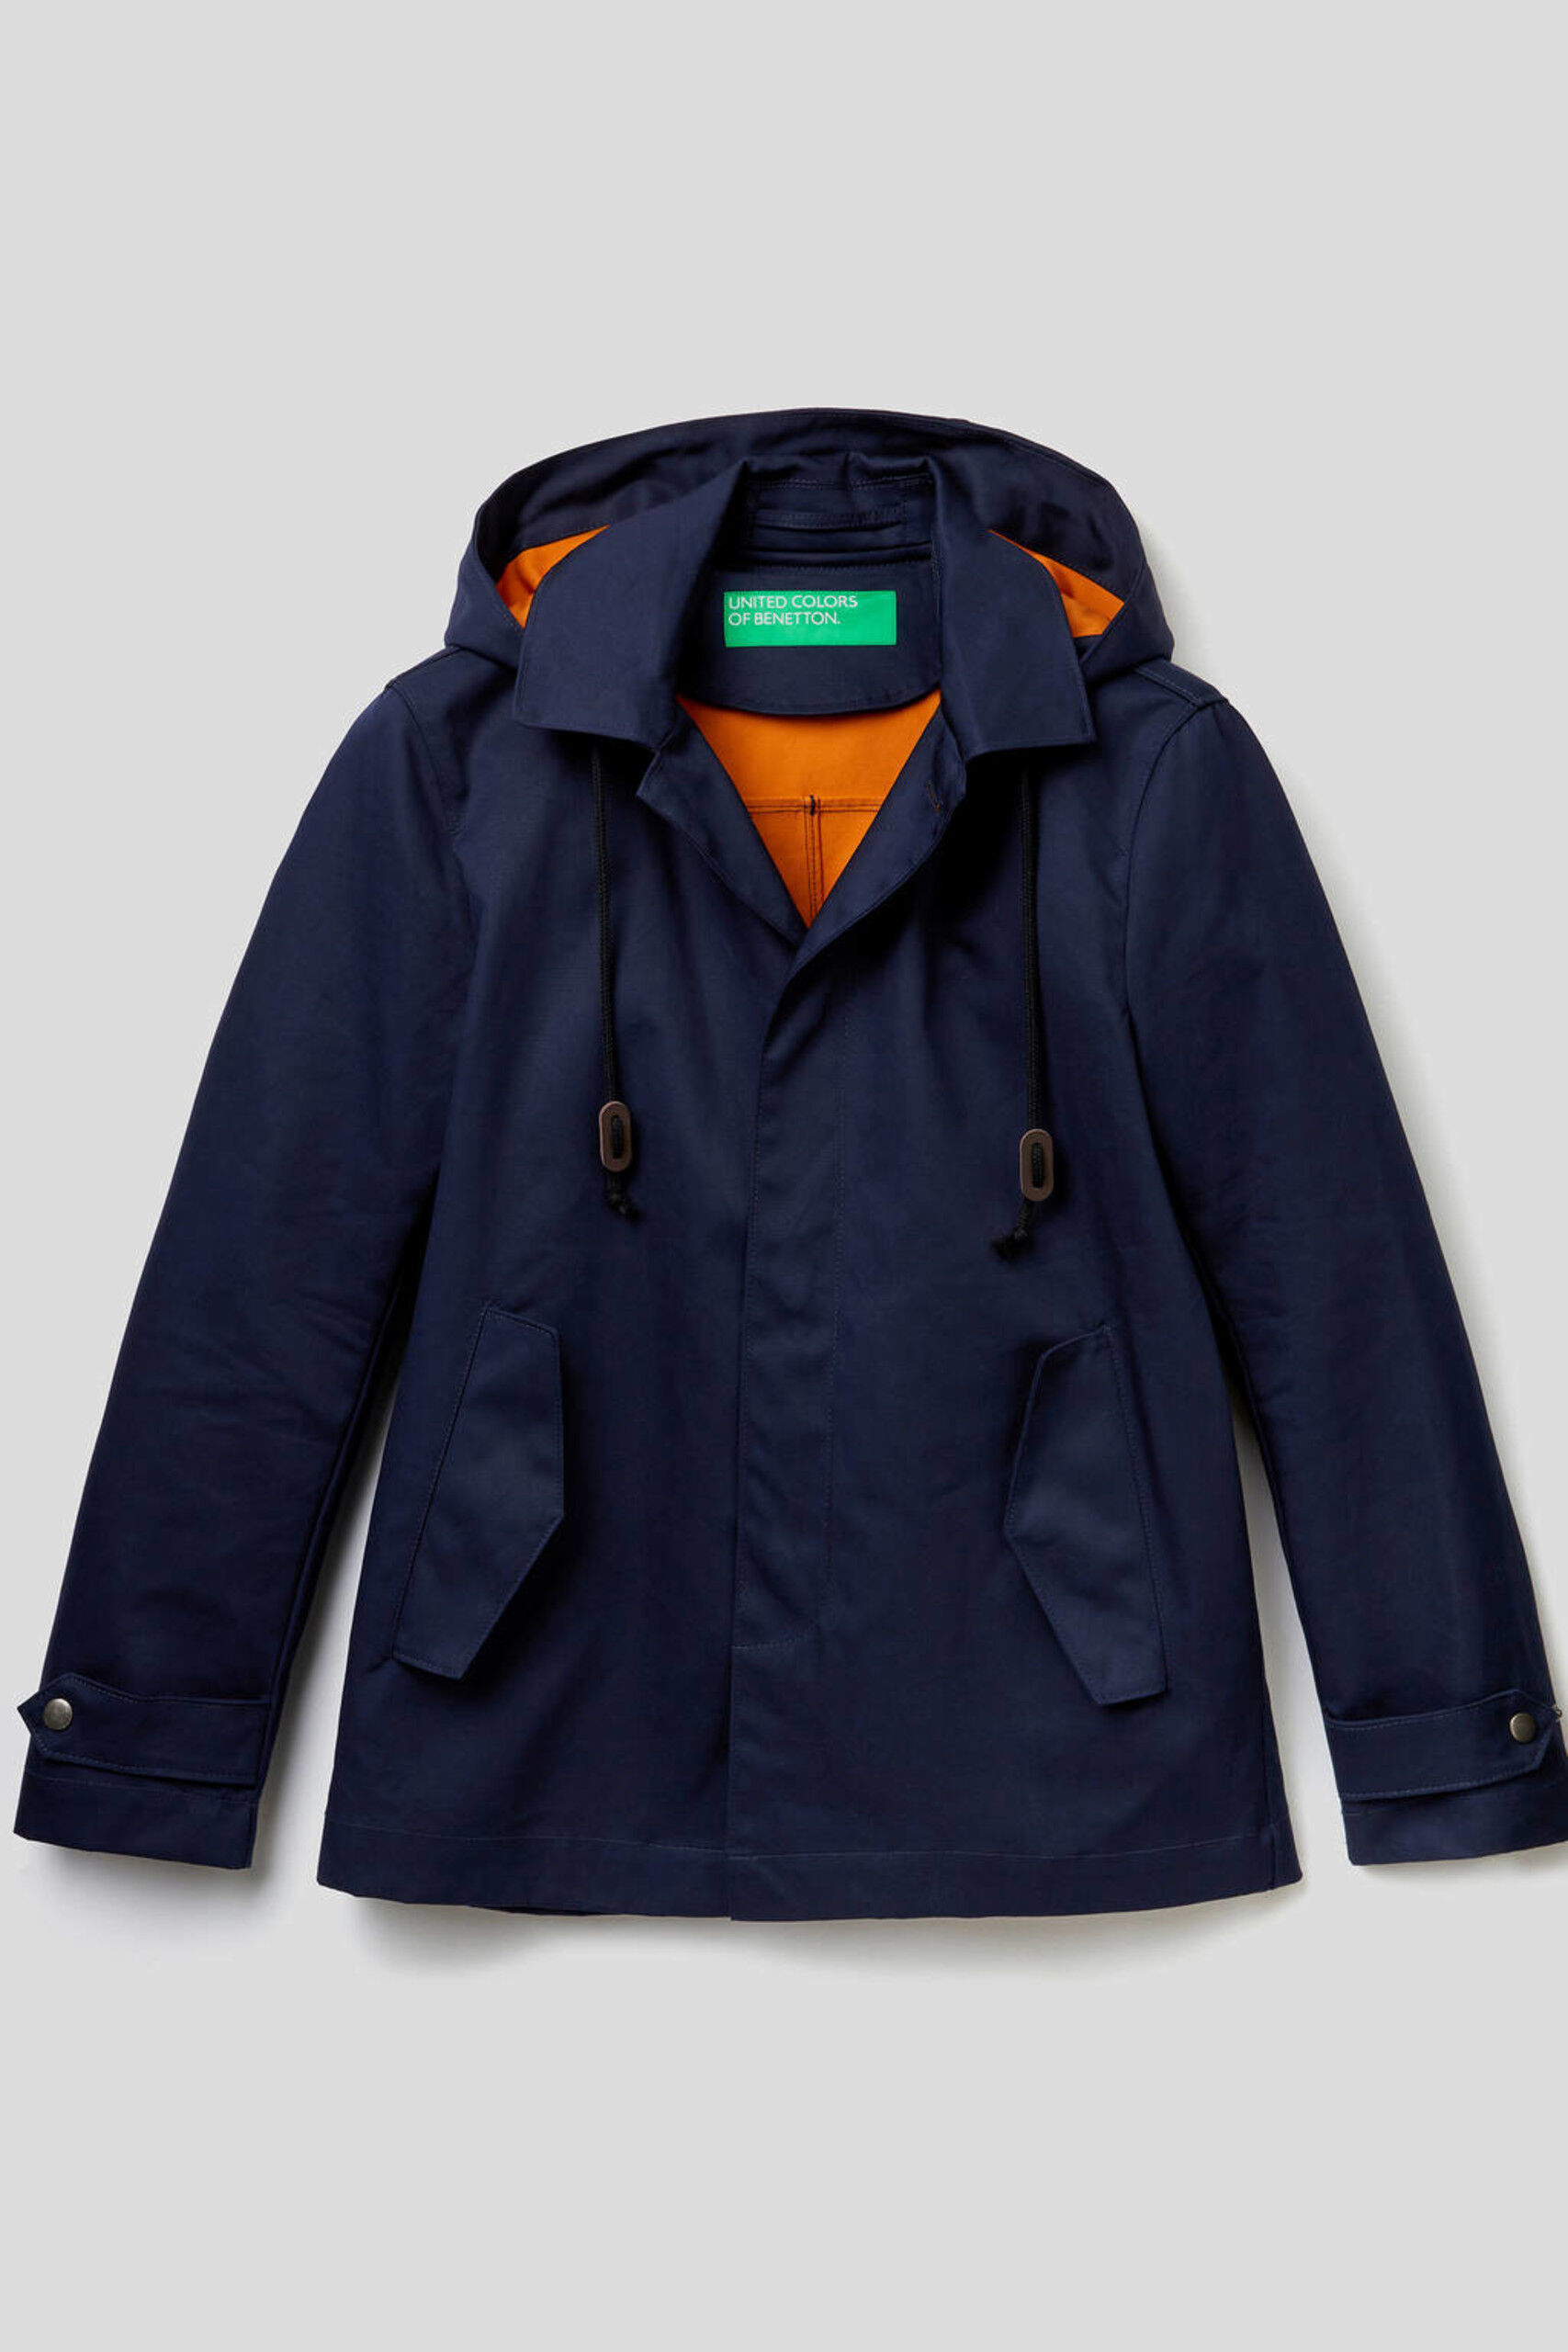 Men's Coats and Jackets Sale Collection 2021 | Benetton